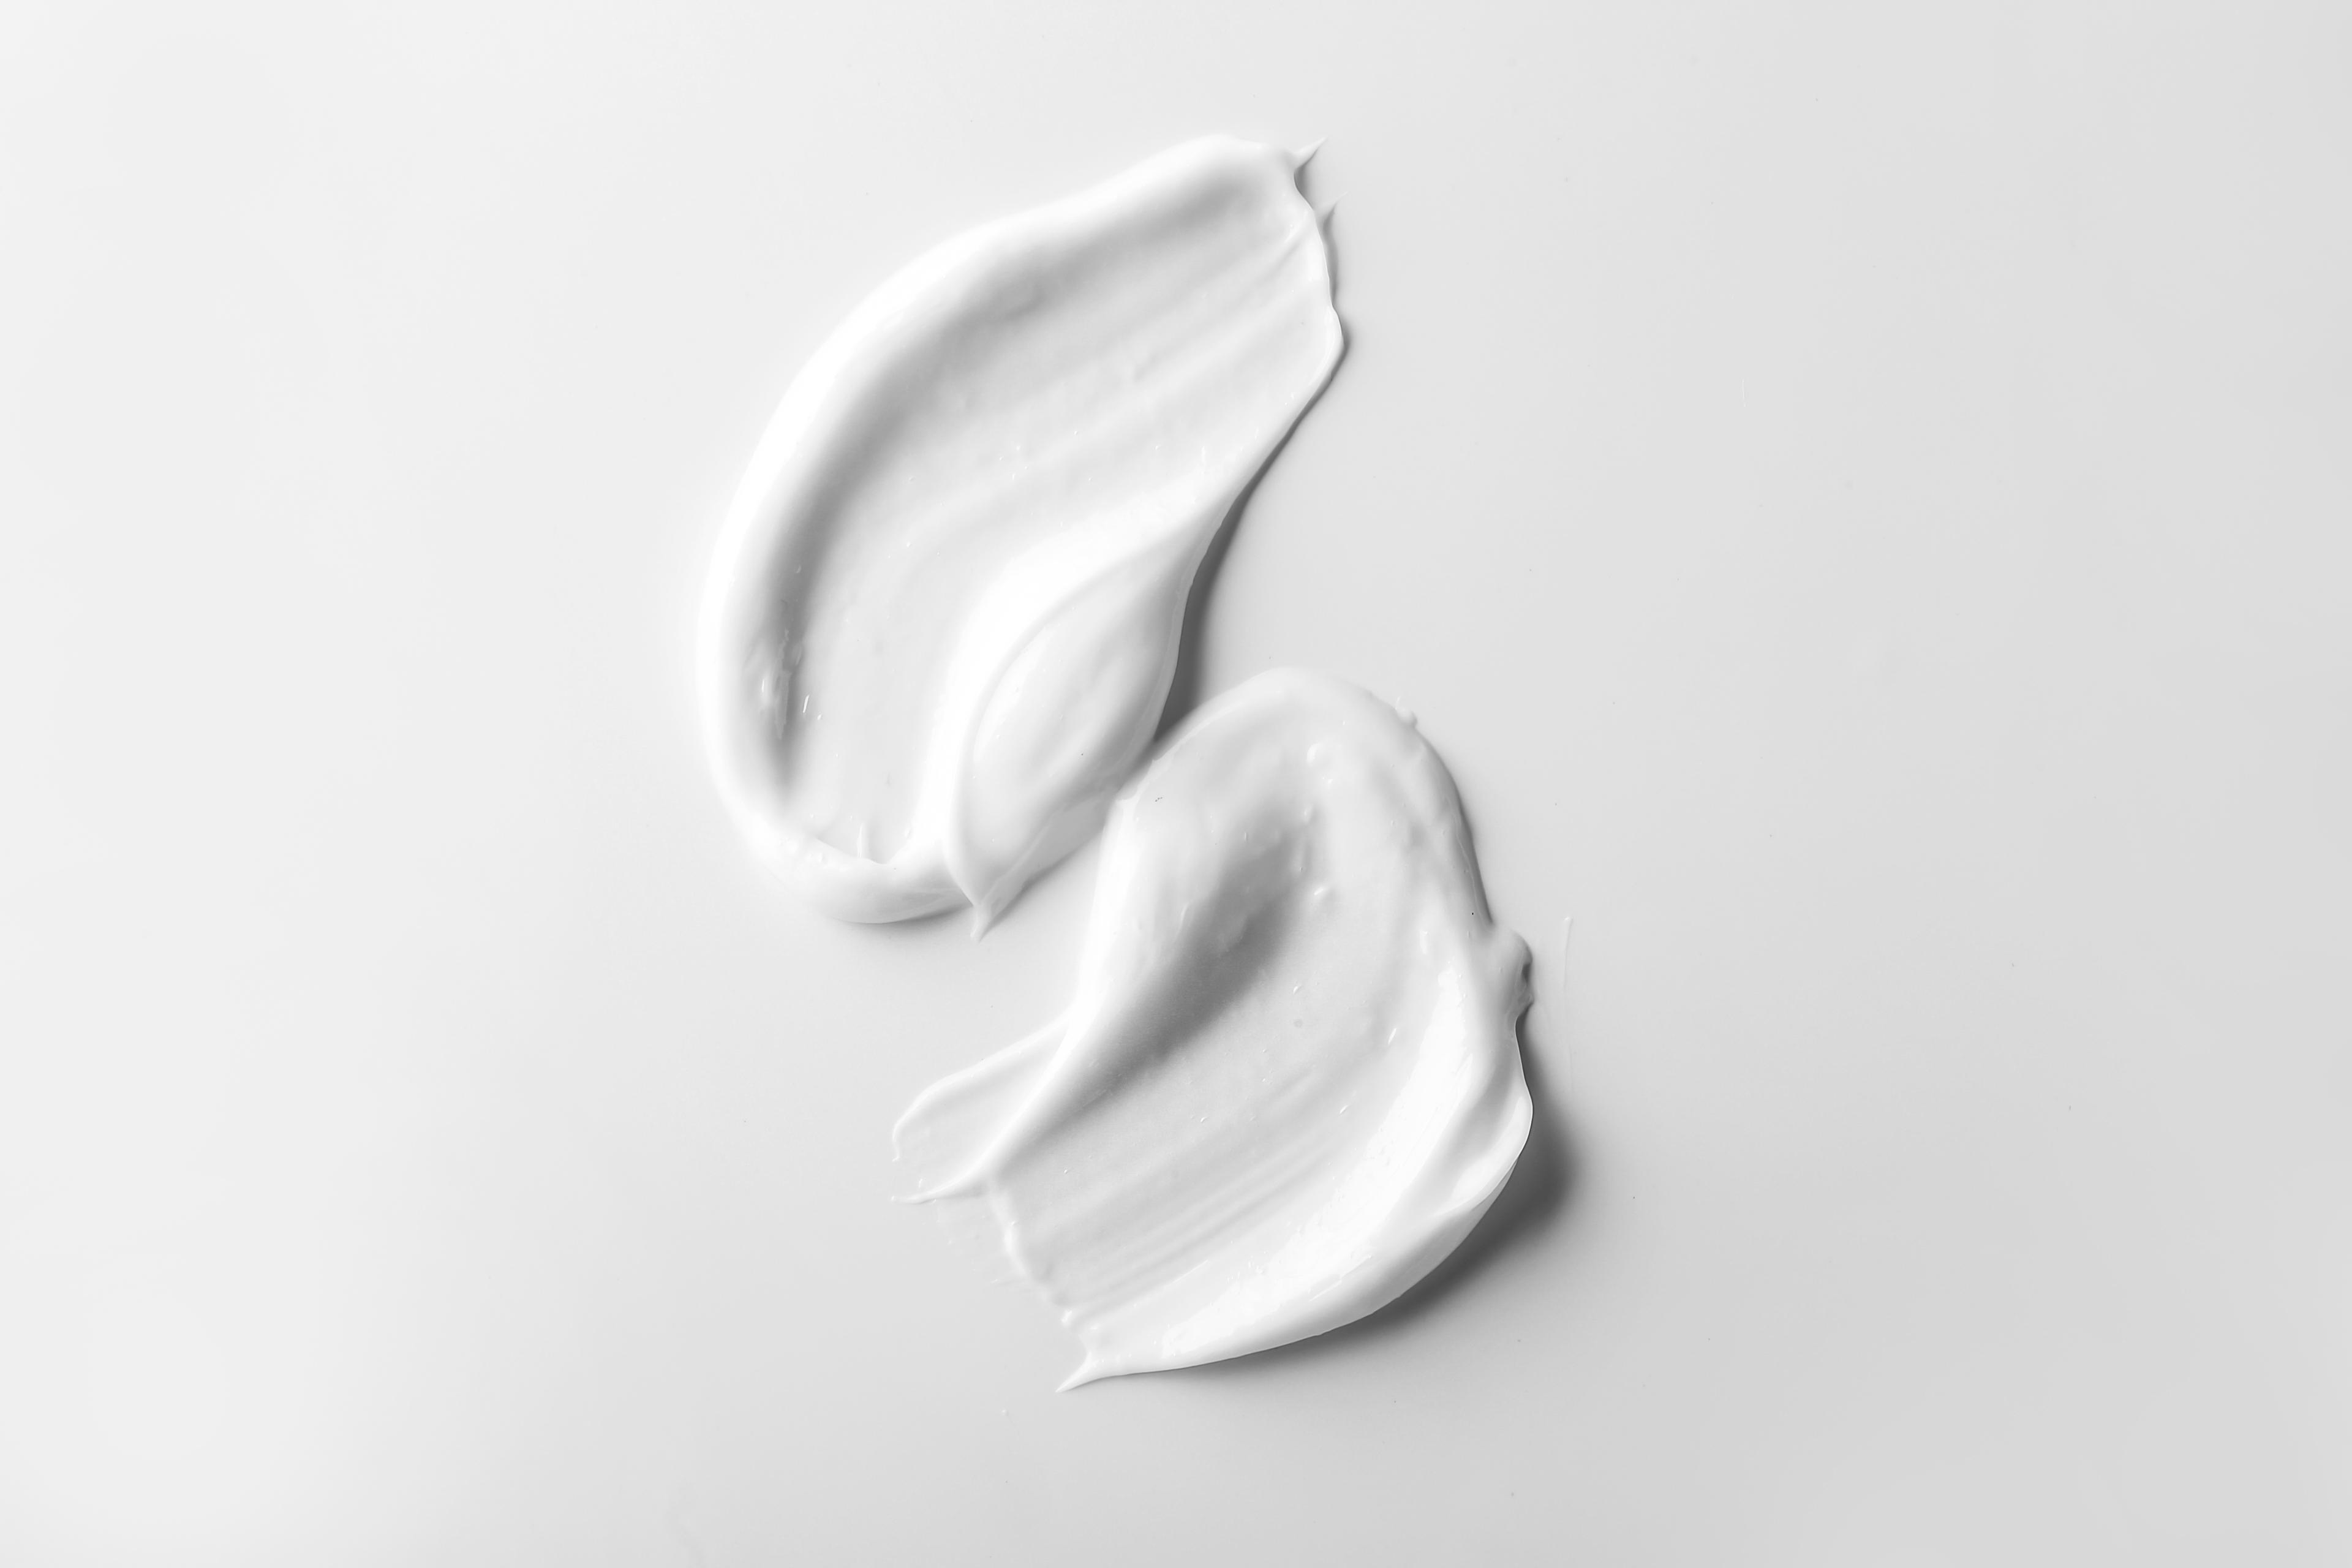 Two smears of topical finasteride gel or cream on a white background.